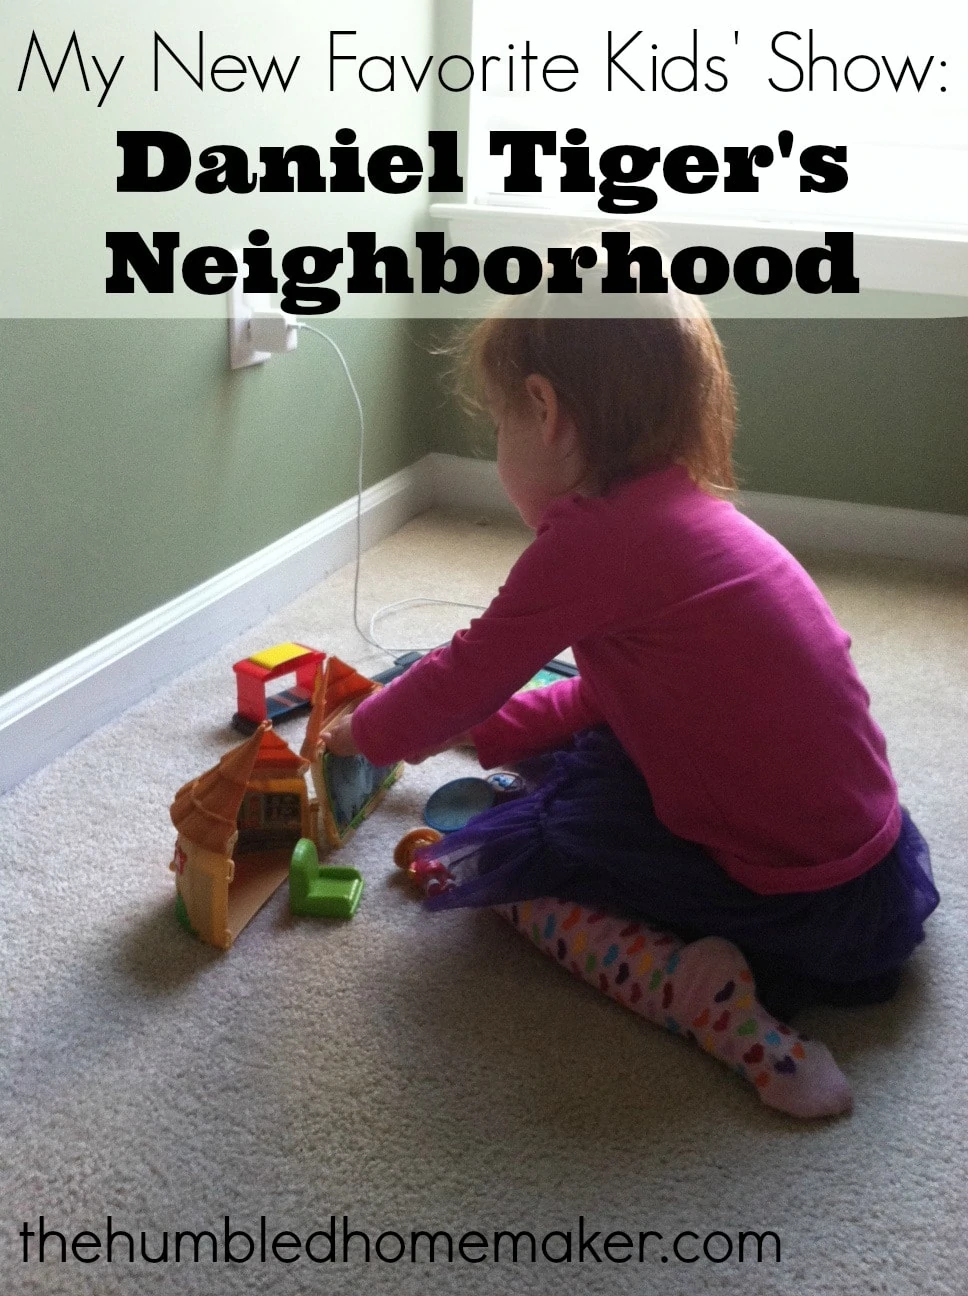 Looking for a GREAT, wholesome TV show for your kids that will take you back to childhood? Check out Daniel Tiger's Neighborhood!